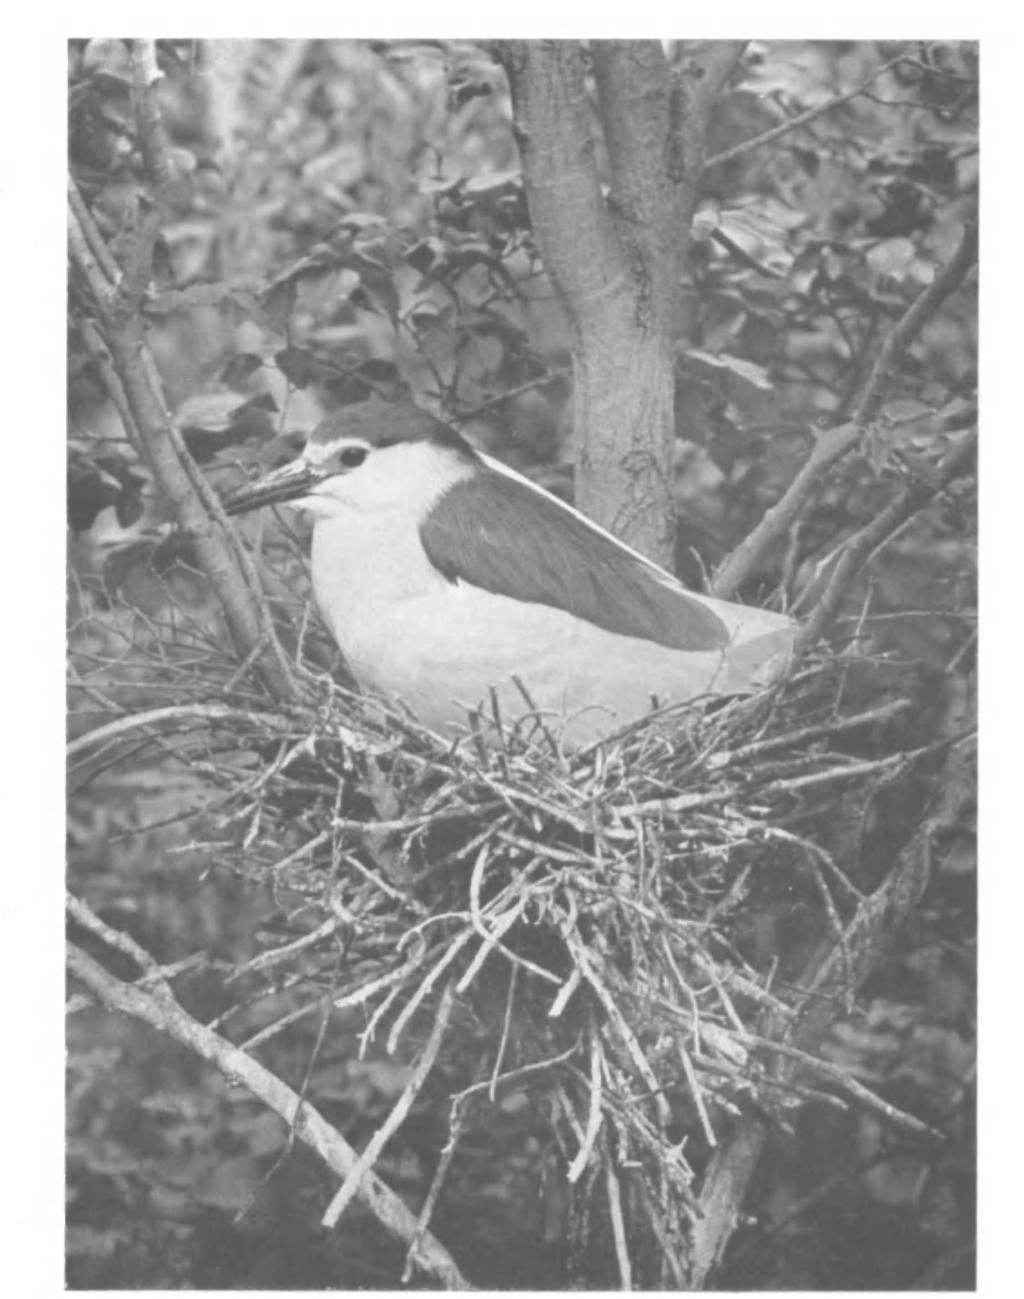 British Birds, Vol. xlvii, Pi. 55. ADULT SITTING ON NEST. CAMARGUE, SOUTH FRANCE. APRIL, 1938. (Photographed by G. K. YEATES).